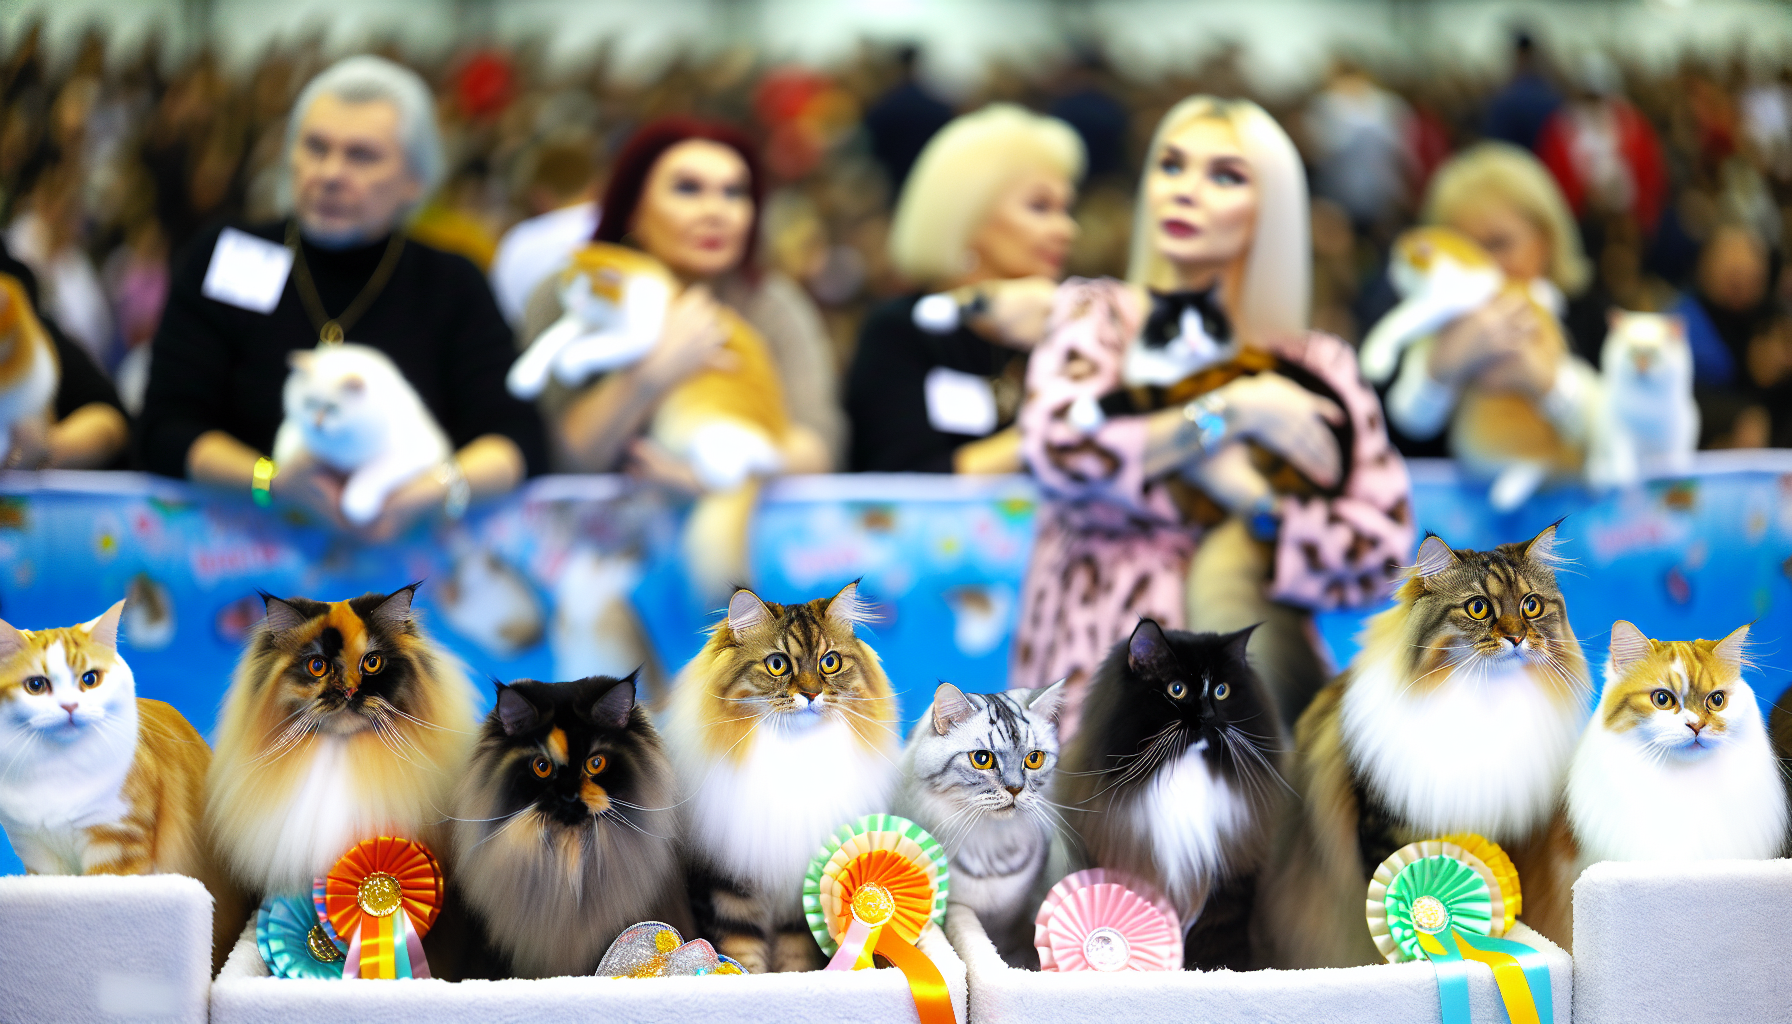 Non-pedigree and pedigree pets participating in a cat show